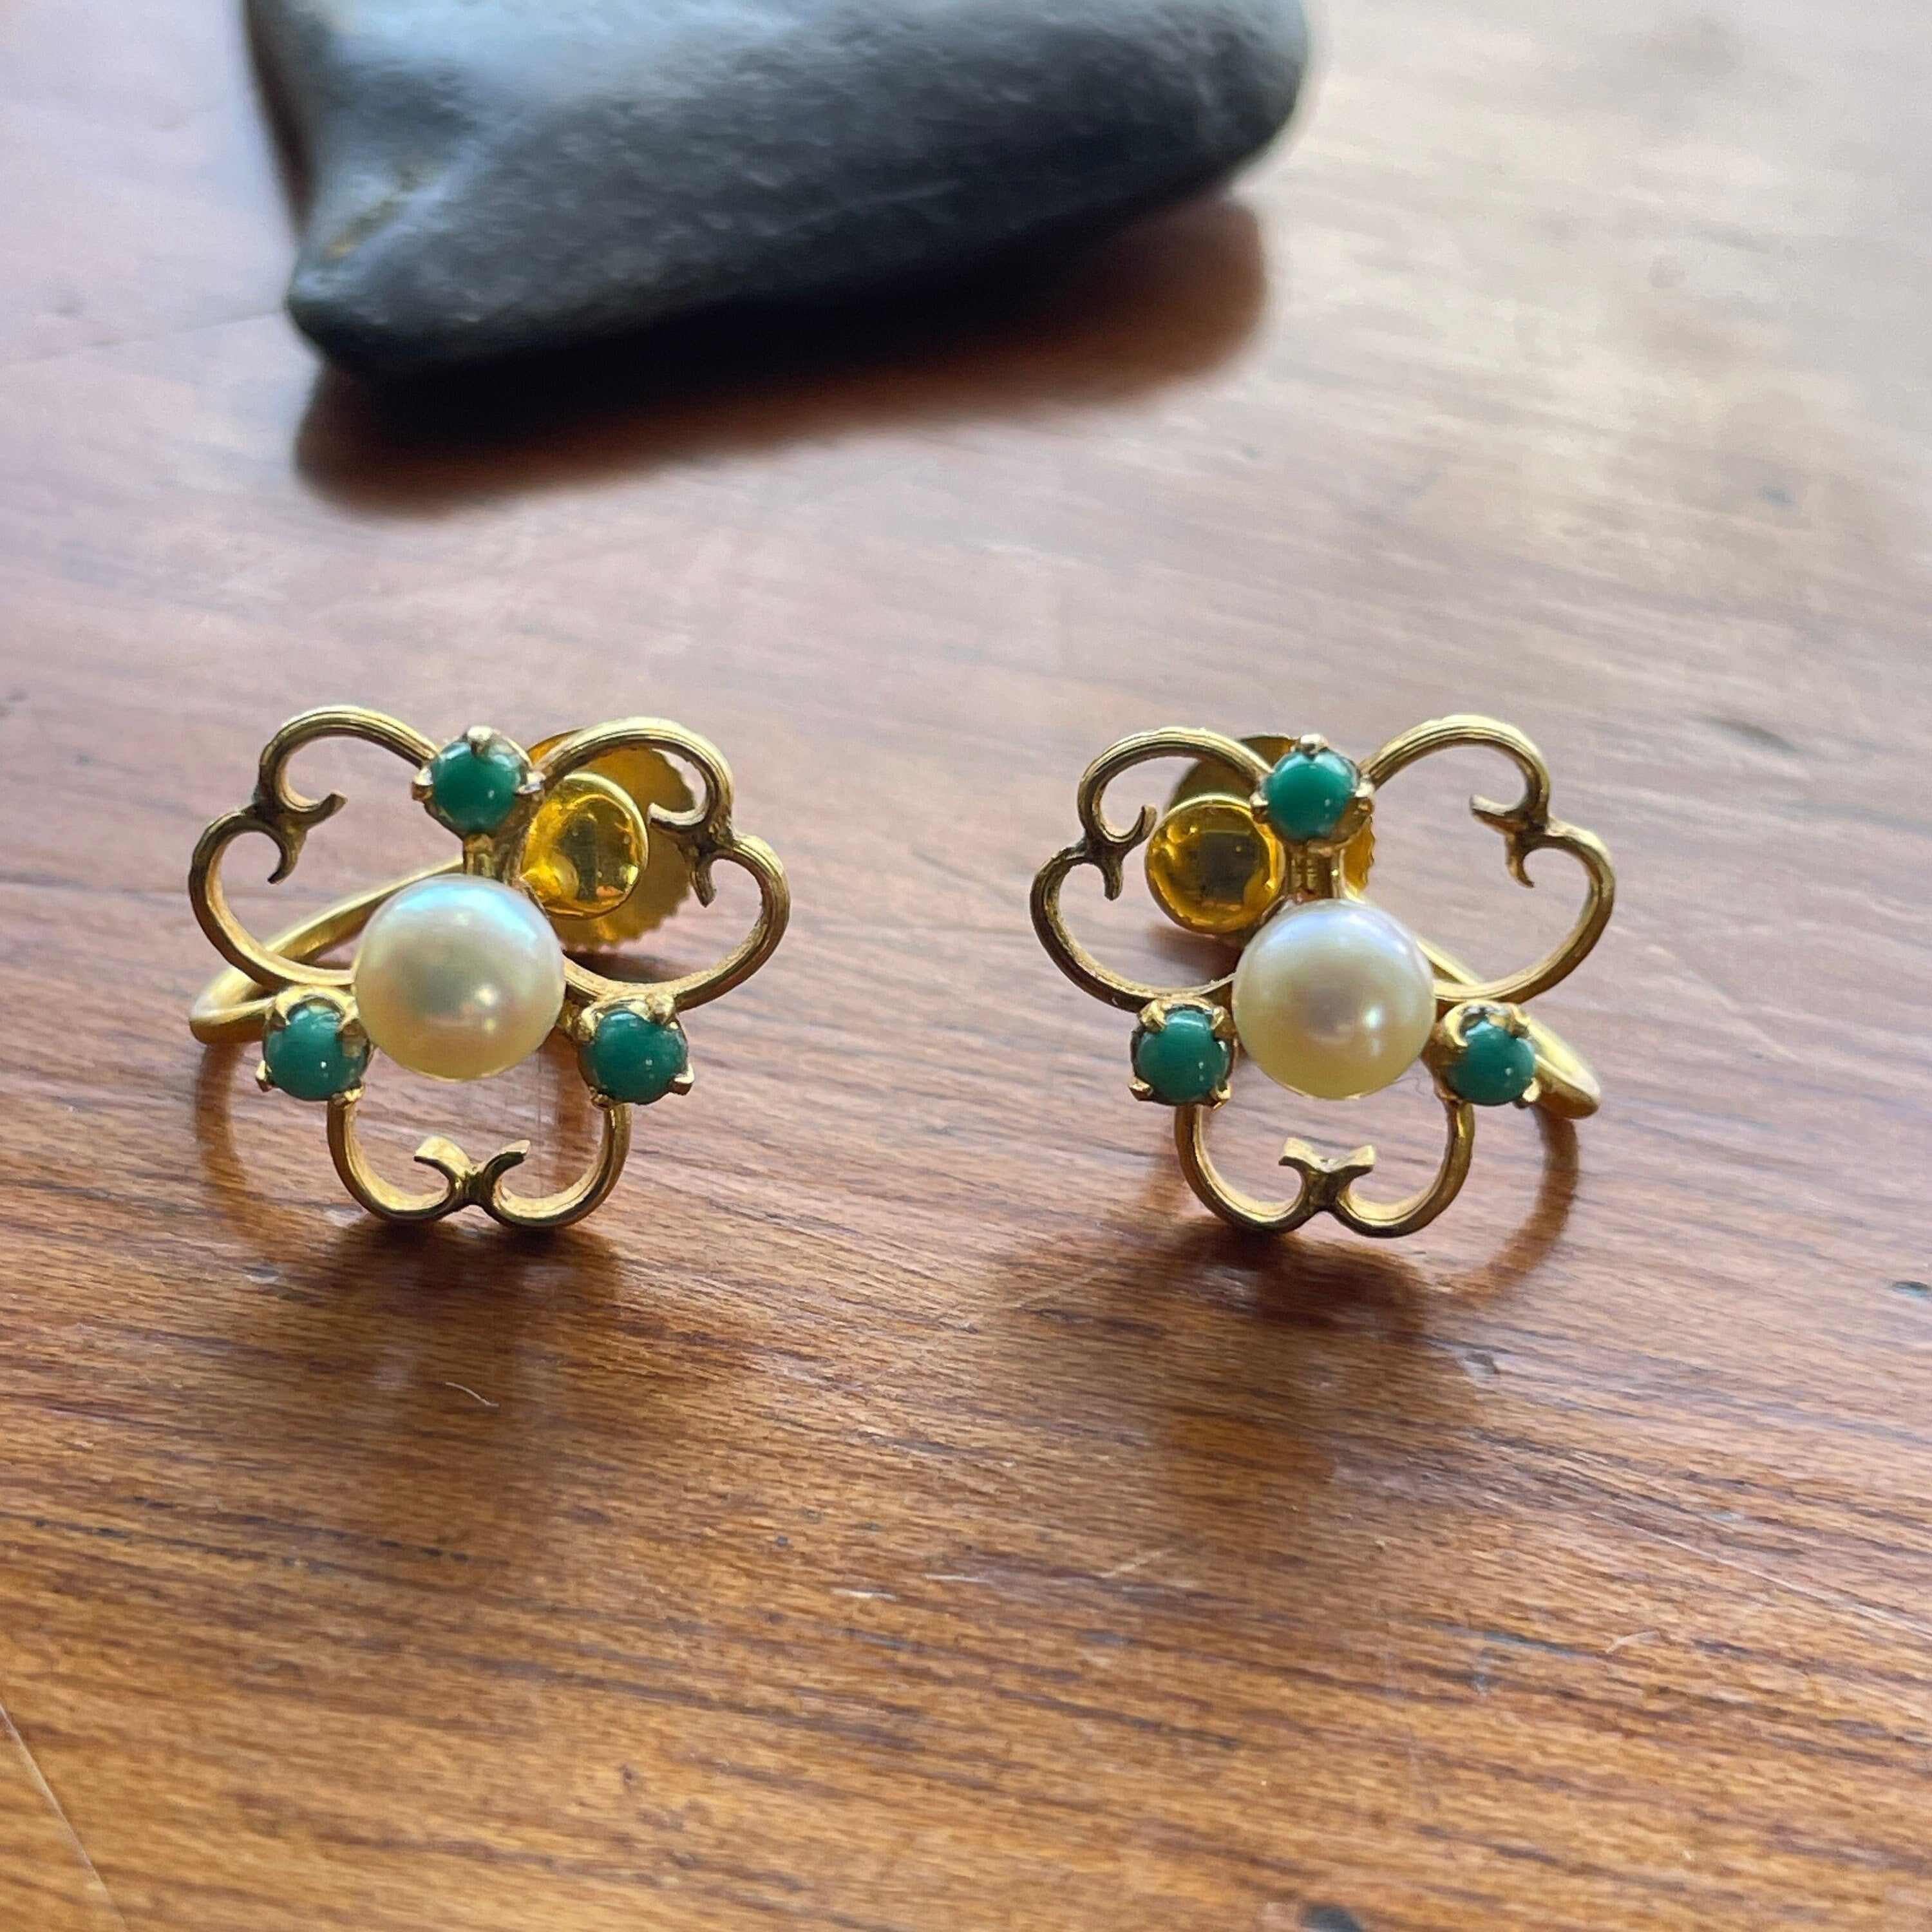 Early 20th century, 9ct gold, pearl & turquoise screw back earrings